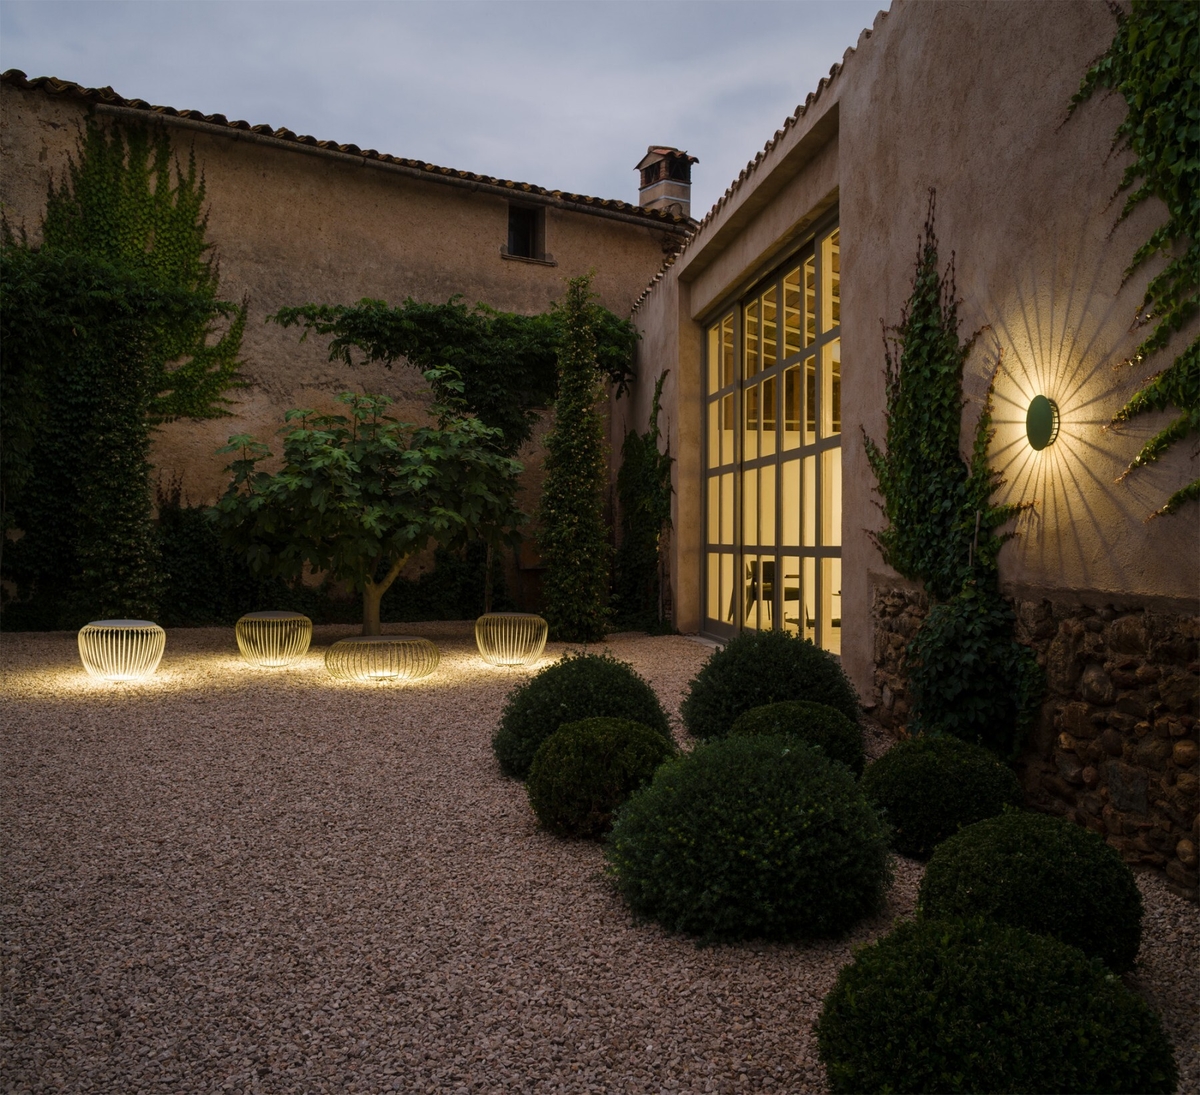 Seating and wall light illuminated in outdoor garden area